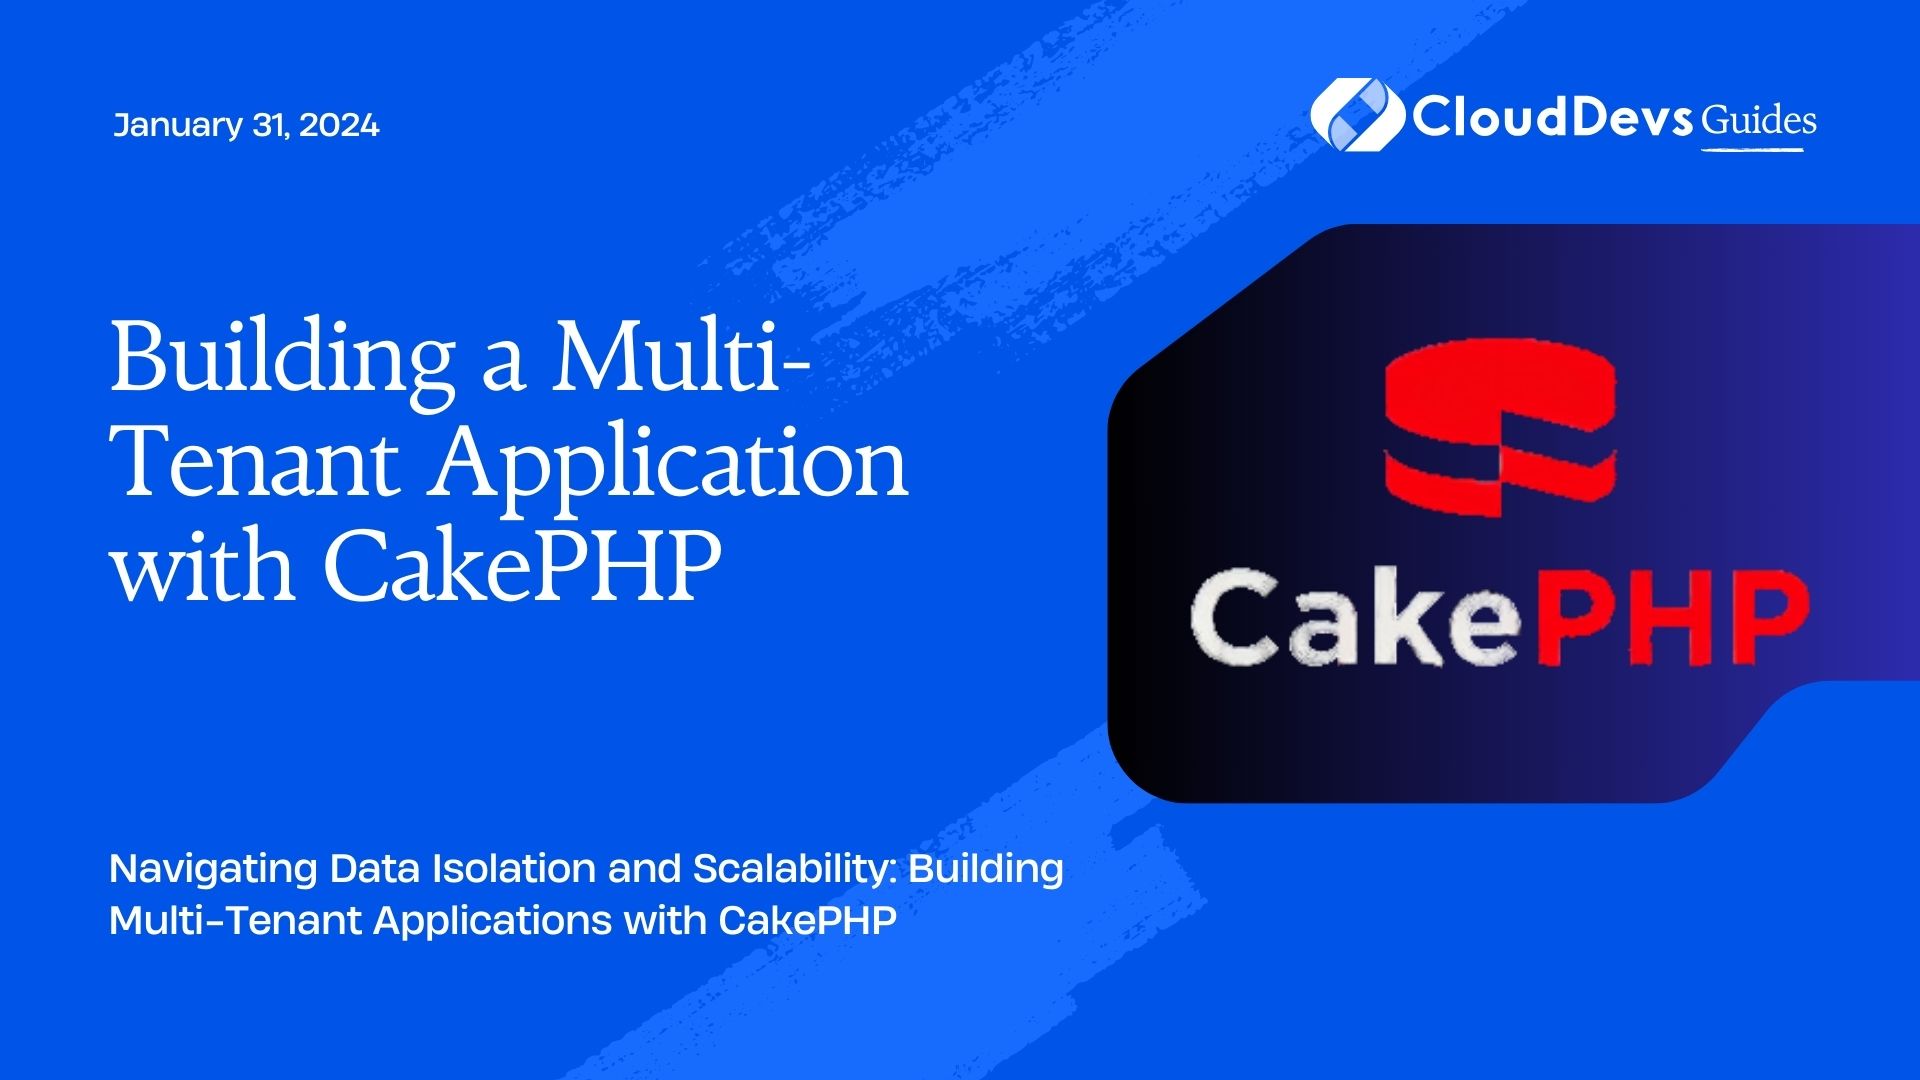 Building a Multi-Tenant Application with CakePHP